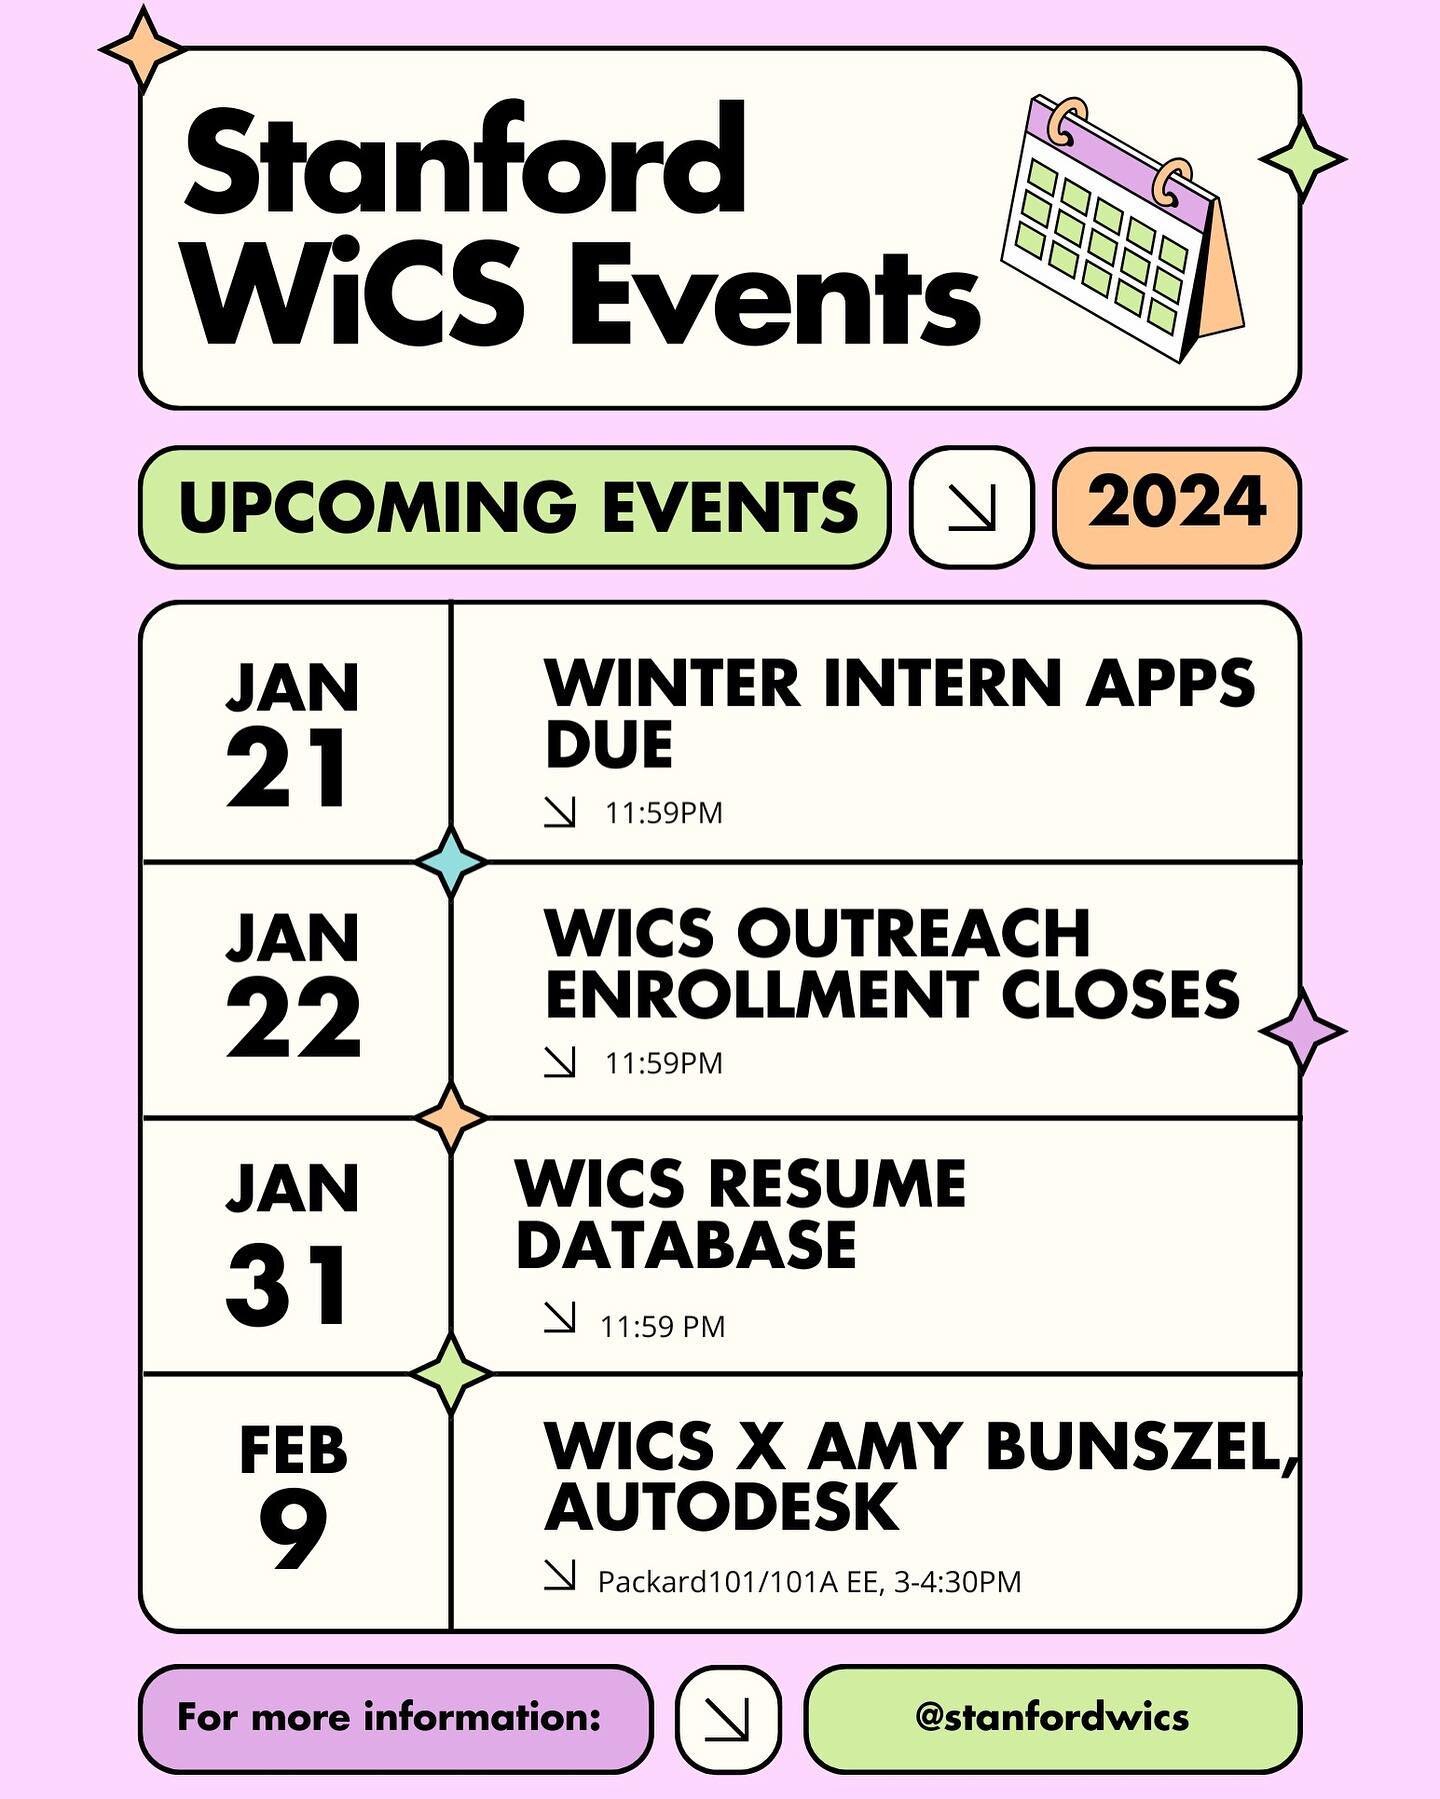 Happy near year and week 3!!! Here are some compiled events and due dates for you!! 

💜 Winter intern apps due tonight 1/21 11:59pm
💜 Enrollment for outreach volunteers closes 1/22 11:59pm
💜 WiCS Resume Database by 1/31
💜 WiCS x Amy Bunszel from 